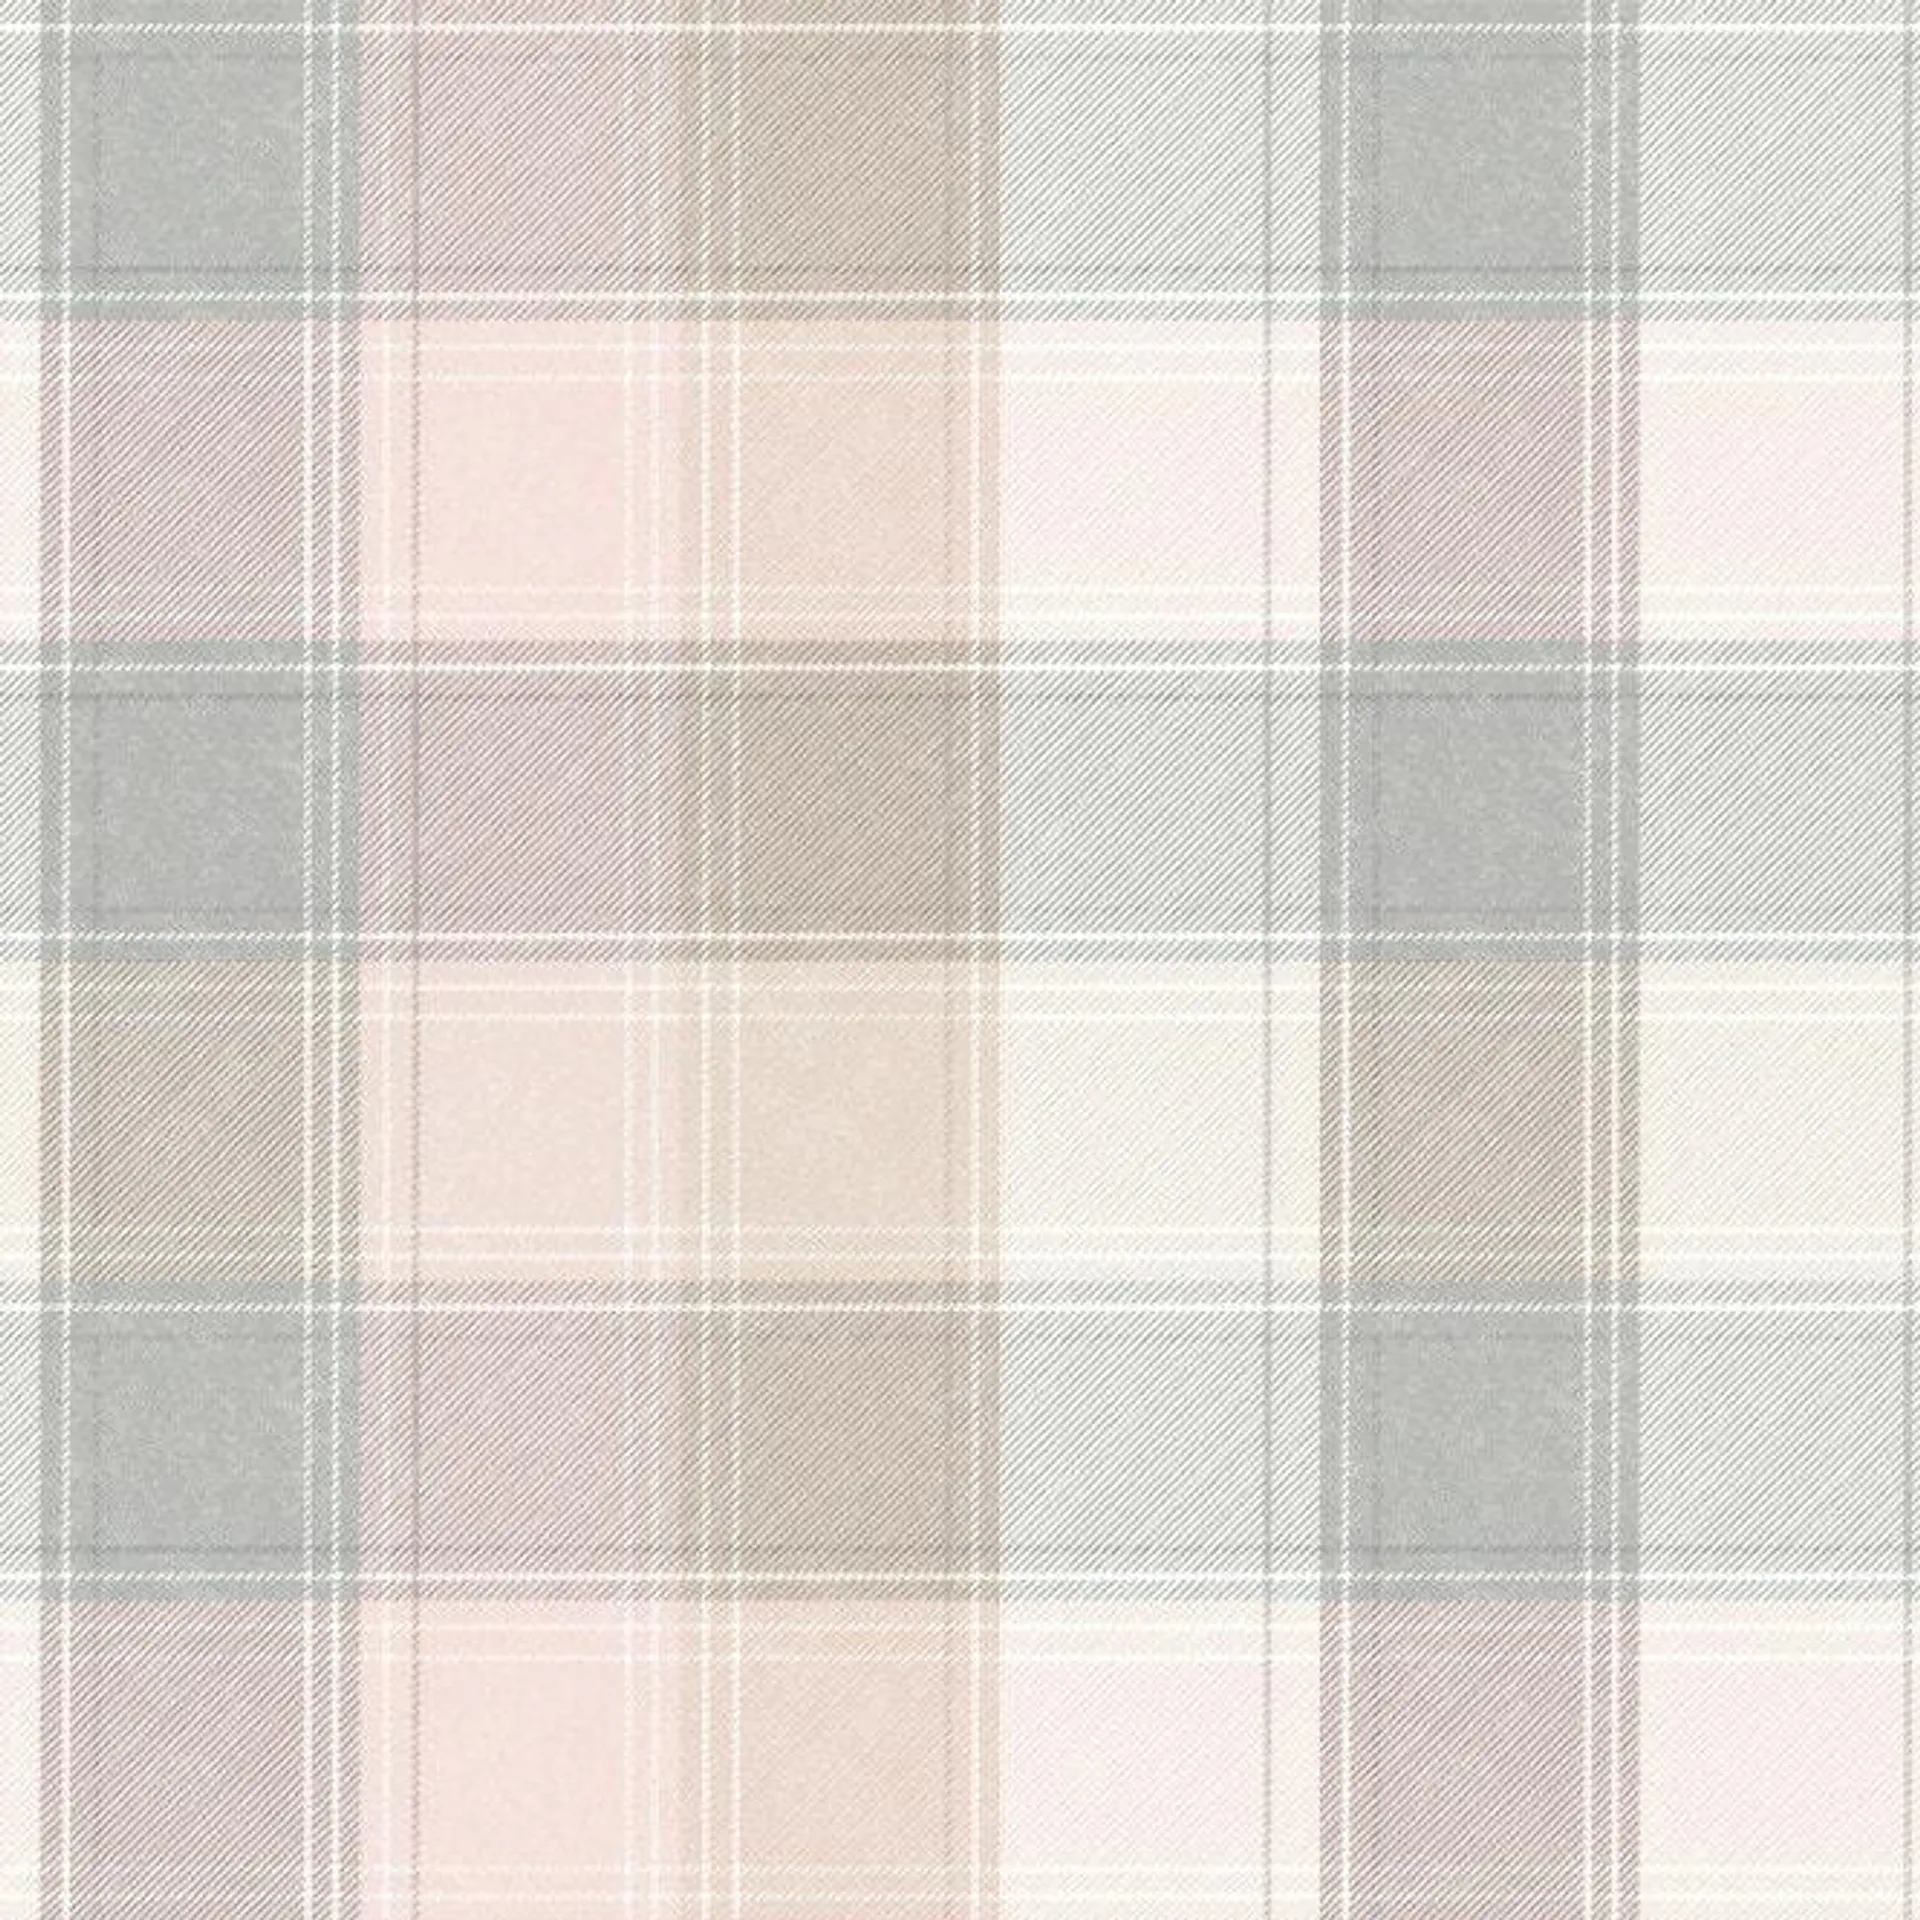 Country Check wallpaper in Pink, Grey